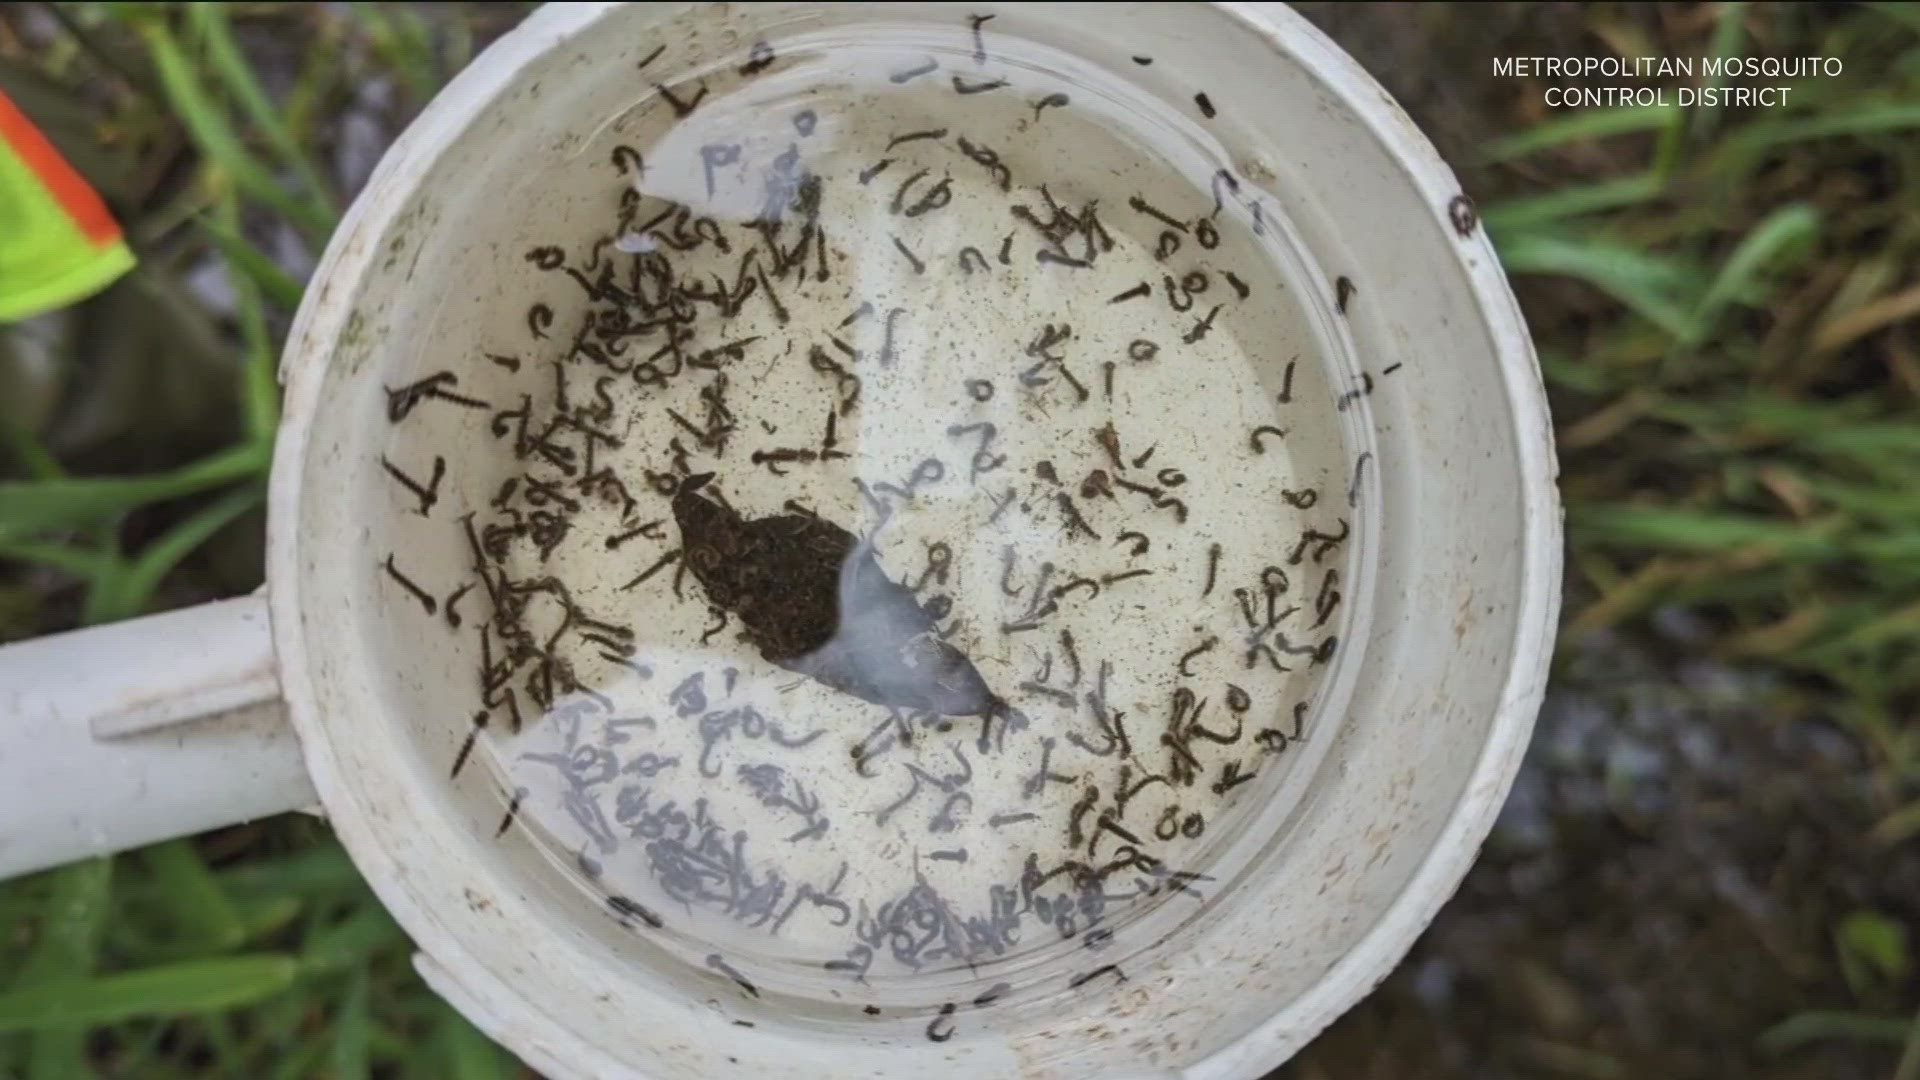 The Metropolitan Mosquito Control District says workers are collecting samples that show more than 50 larva. They say two to three is enough to warrant treatment.